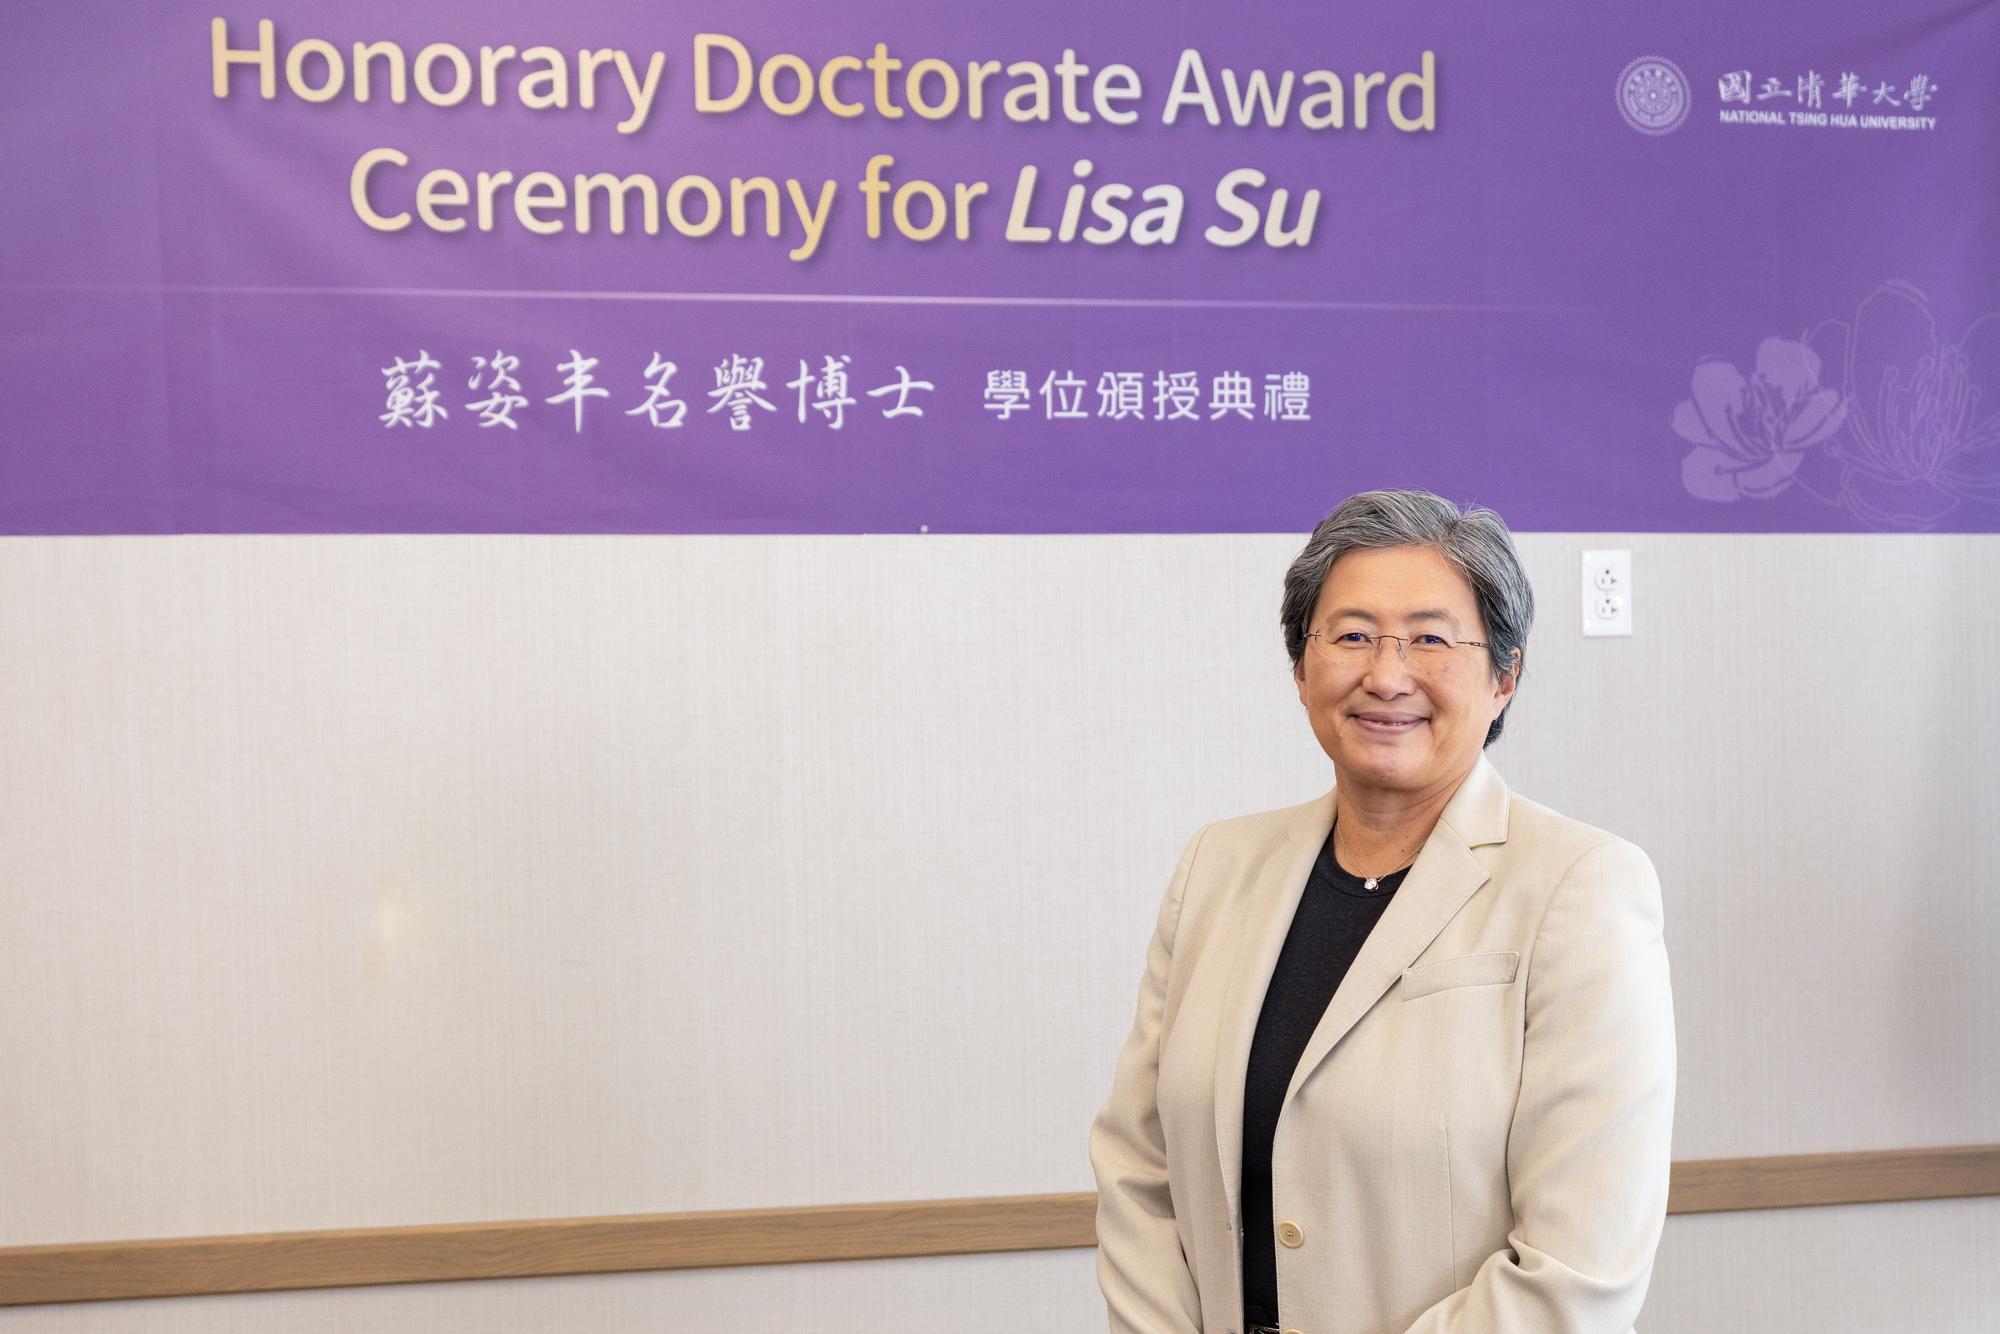 Lisa Su (蘇姿丰) received the honorary doctorate from NTHU.